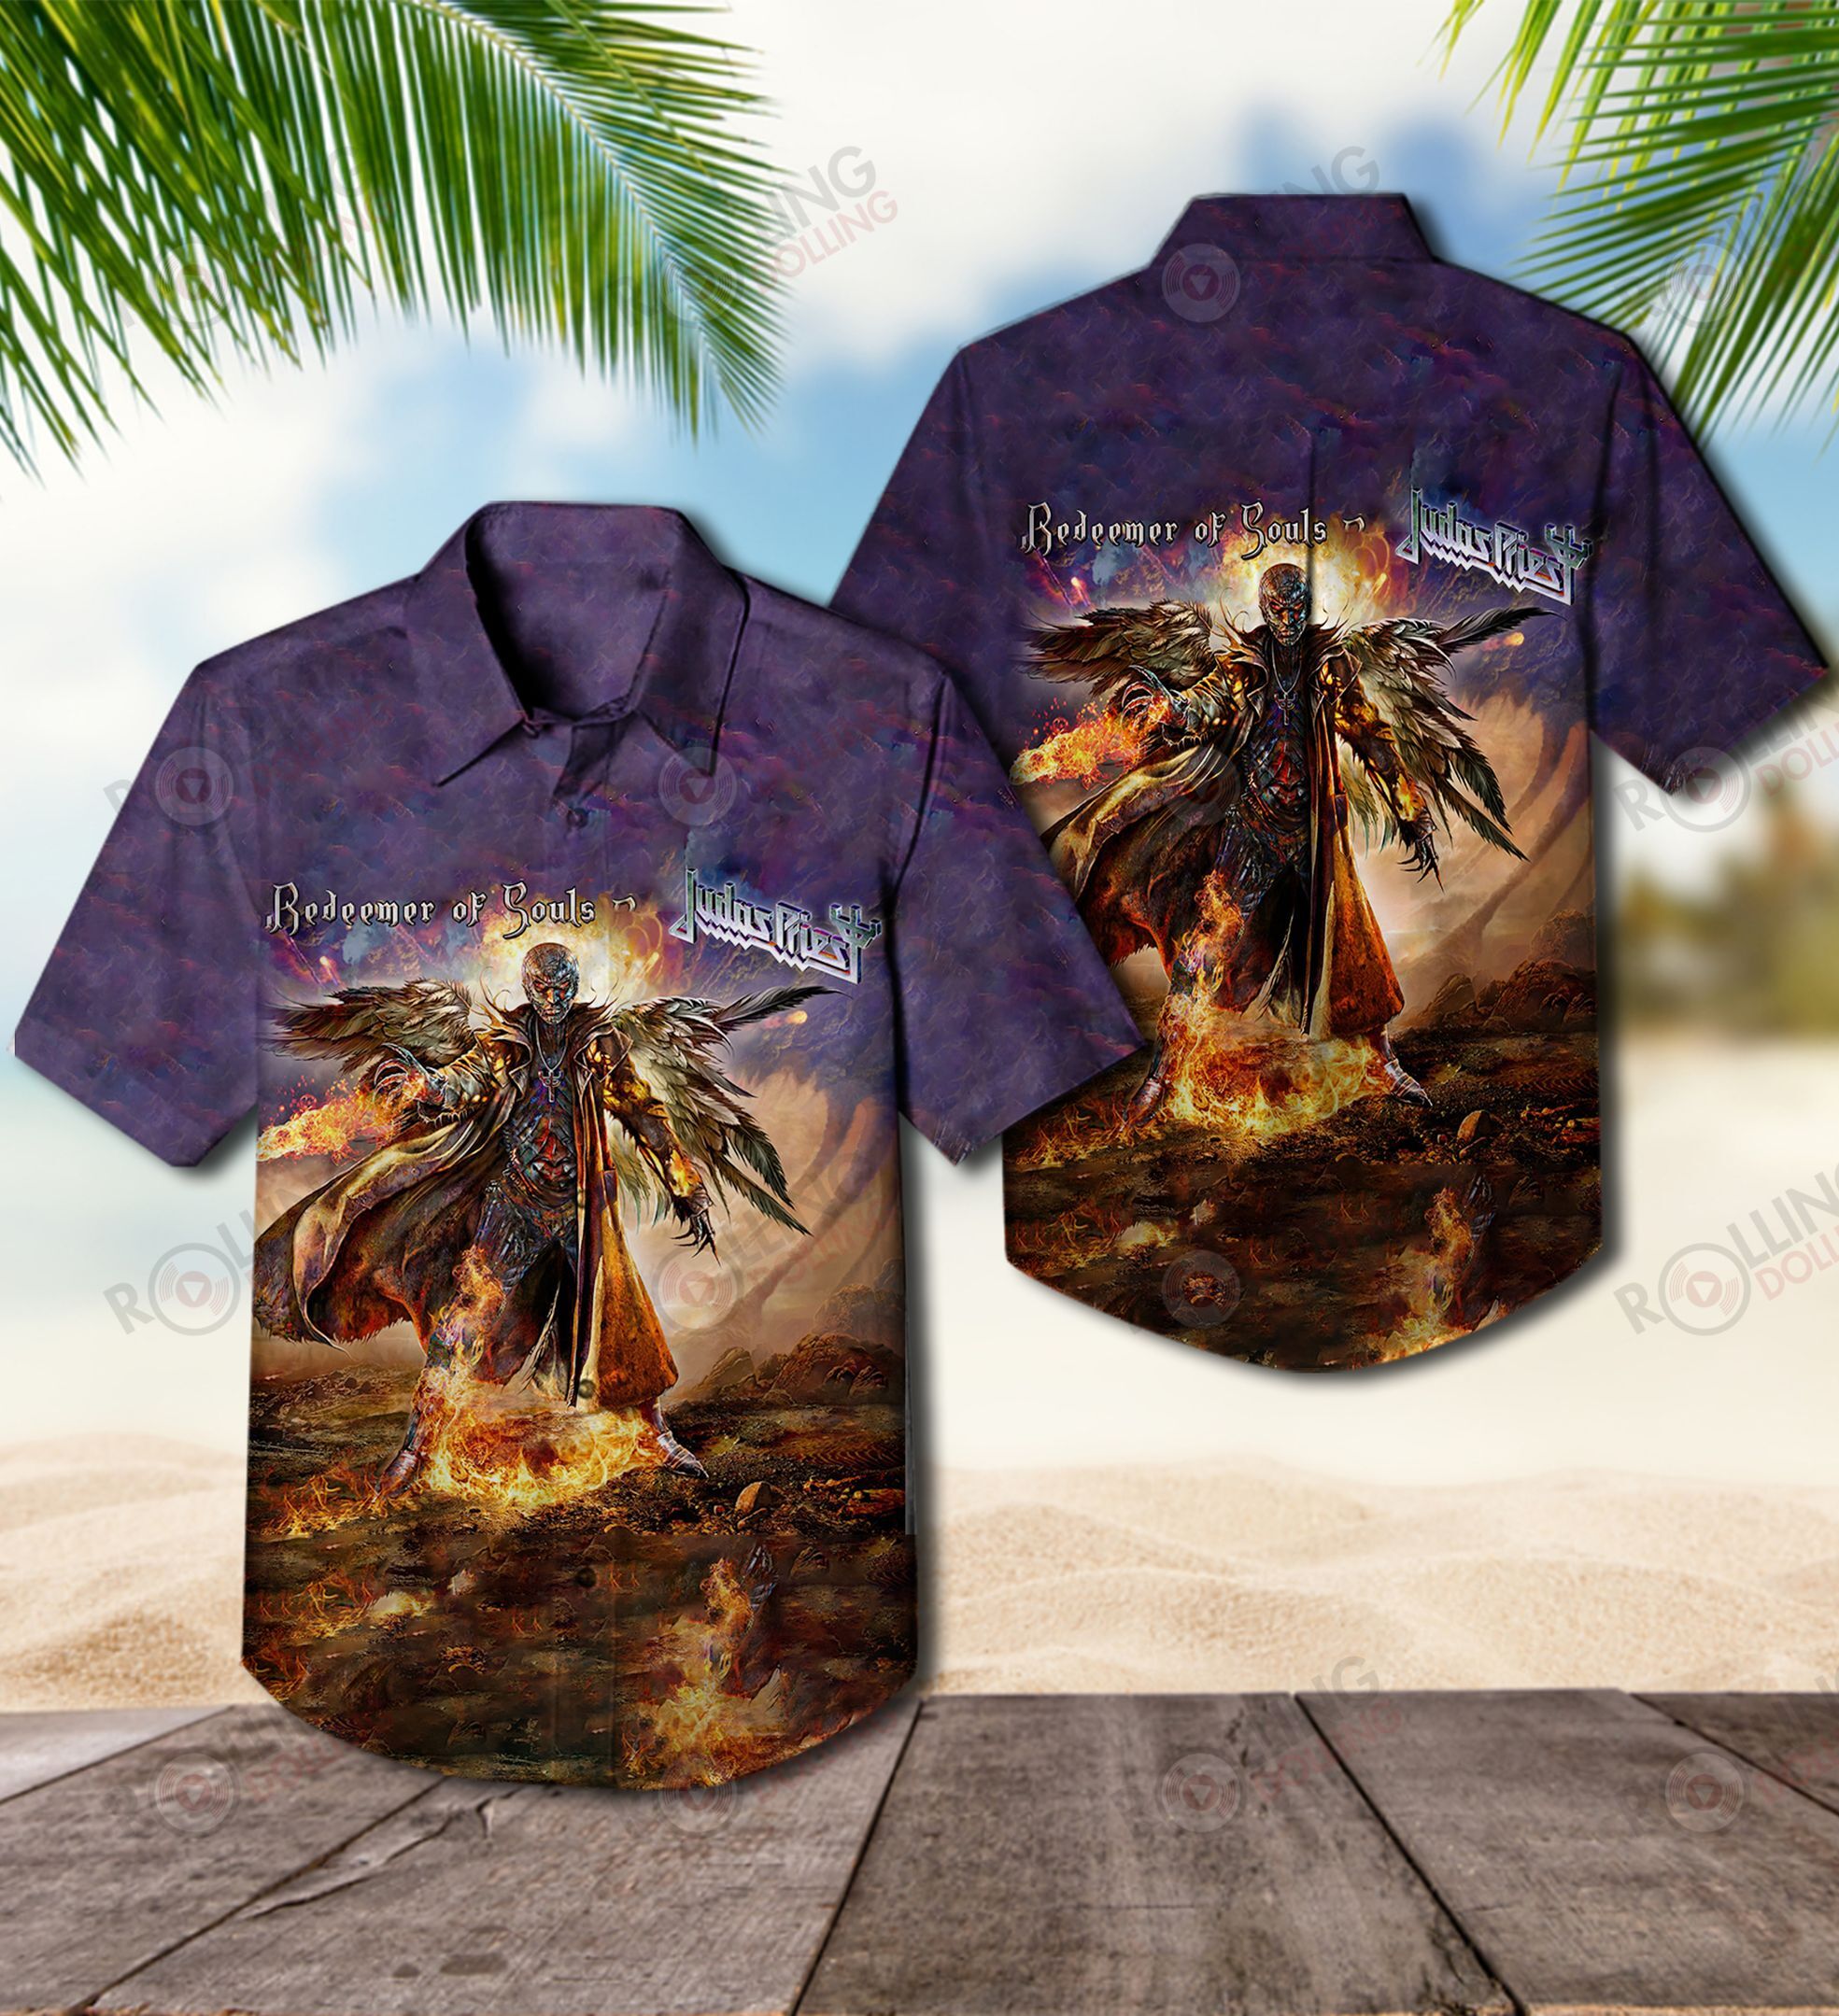 This Hawaiian shirt is an excellent choice if you go on vacation 85